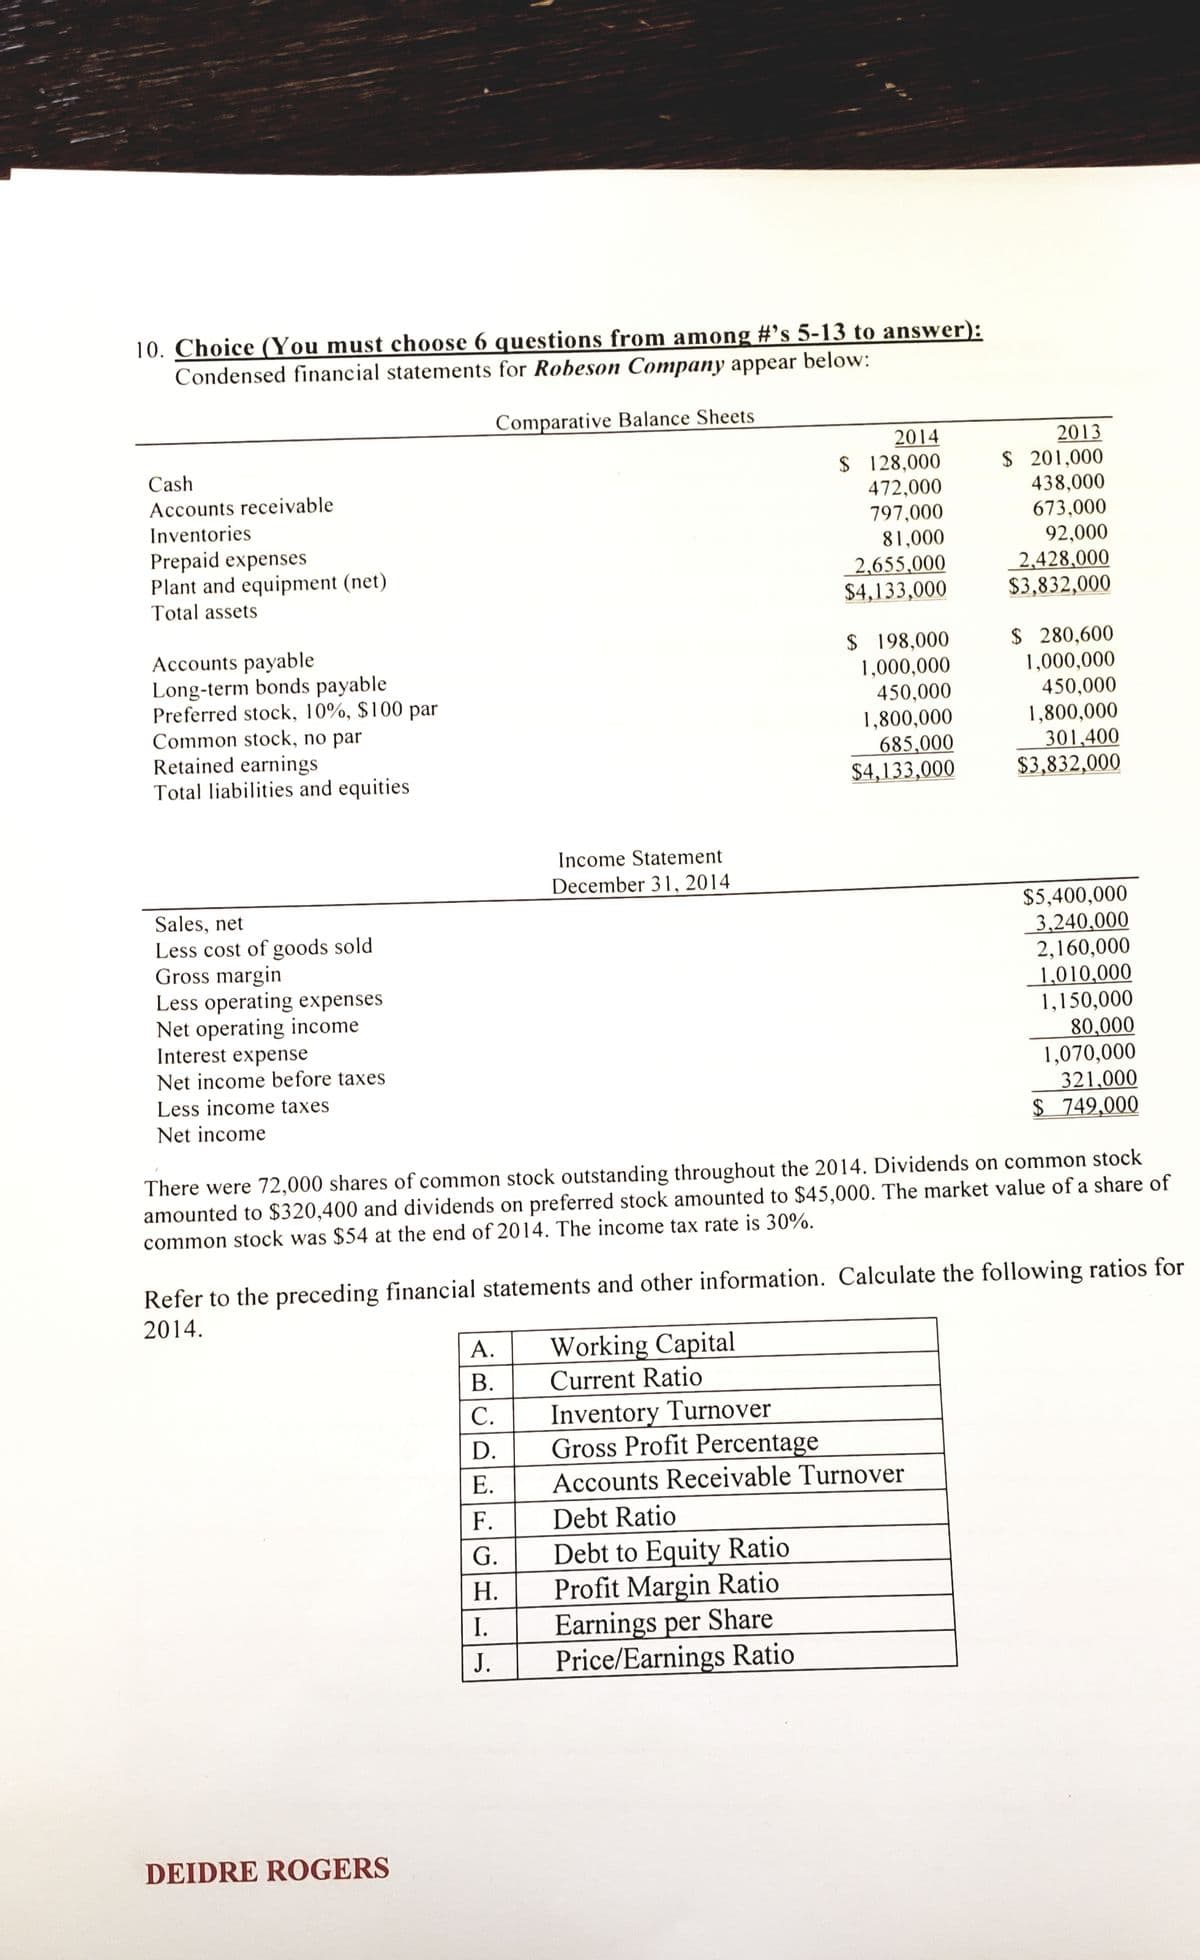 10. Choice (You must choose 6 questions from among #'s 5-13 to answer):
Condensed financial statements for Robeson Company appear below:
Comparative Balance Sheets
2014
$ 128,000
472,000
2013
$ 201,000
438,000
Cash
Accounts receivable
Inventories
797,000
673,000
81,000
92,000
Prepaid expenses
Plant and equipment (net)
Total assets
2,655,000
$4,133,000
2,428,000
$3,832,000
$ 280,600
1,000,000
450,000
1,800,000
301,400
$3,832,000
$ 198,000
1,000,000
Accounts payable
Long-term bonds payable
Preferred stock, 10%, $100 par
Common stock, no par
Retained earnings
Total liabilities and equities
450,000
1,800,000
685,000
$4,133,000
Income Statement
December 31, 2014
$5,400,000
3,240,000
2,160,000
Sales, net
Less cost of goods sold
Gross margin
Less operating expenses
Net operating income
Interest expense
Net income before taxes
1,010,000
1,150,000
80,000
1,070,000
321,000
$ 749,000
Less income taxes
Net income
There were 72,000 shares of common stock outstanding throughout the 2014. Dividends on common stock
amounted to $320,400 and dividends on preferred stock amounted to $45,000. The market value of a share of
common stock was $54 at the end of 2014. The income tax rate is 30%.
Refer to the preceding financial statements and other information. Calculate the following ratios for
2014.
Working Capital
Current Ratio
A.
В.
Inventory Turnover
Gross Profit Percentage
С.
D.
Е.
Accounts Receivable Turnover
F.
Debt Ratio
Debt to Equity Ratio
Profit Margin Ratio
Earnings per Share
Price/Earnings Ratio
G.
Н.
I.
J.
DEIDRE ROGERS
